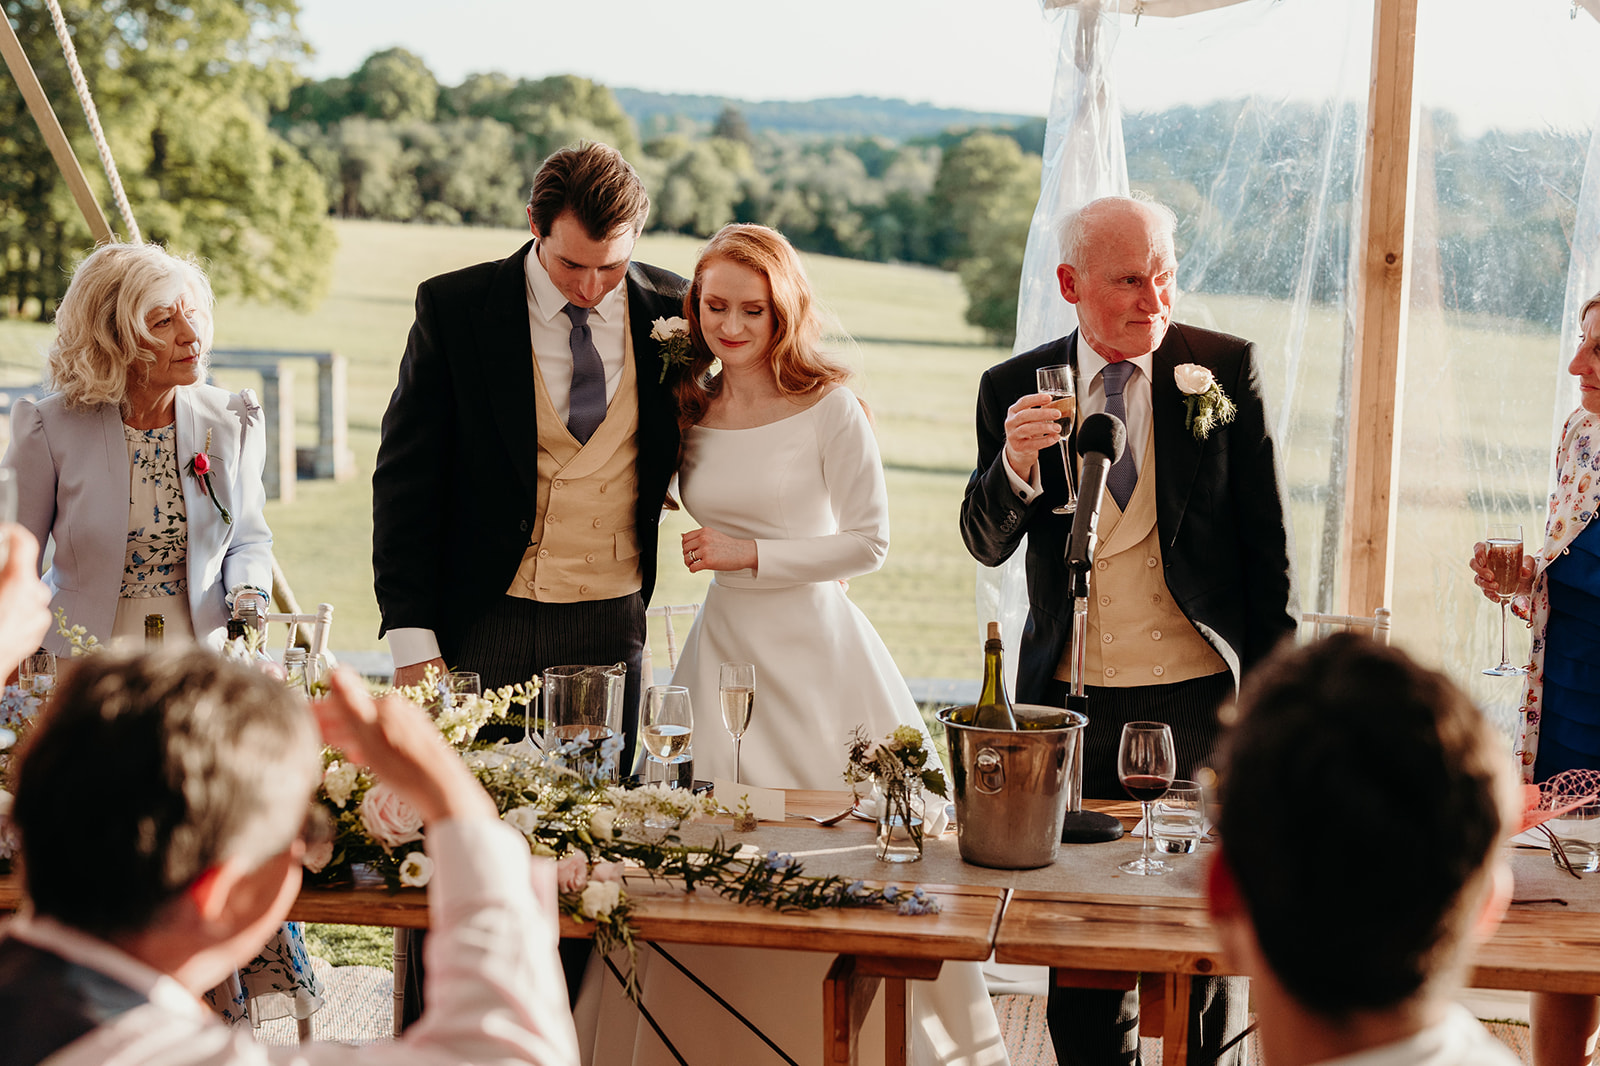 Heartfelt speeches during the sumptuous dining at the East Sussex country house wedding.